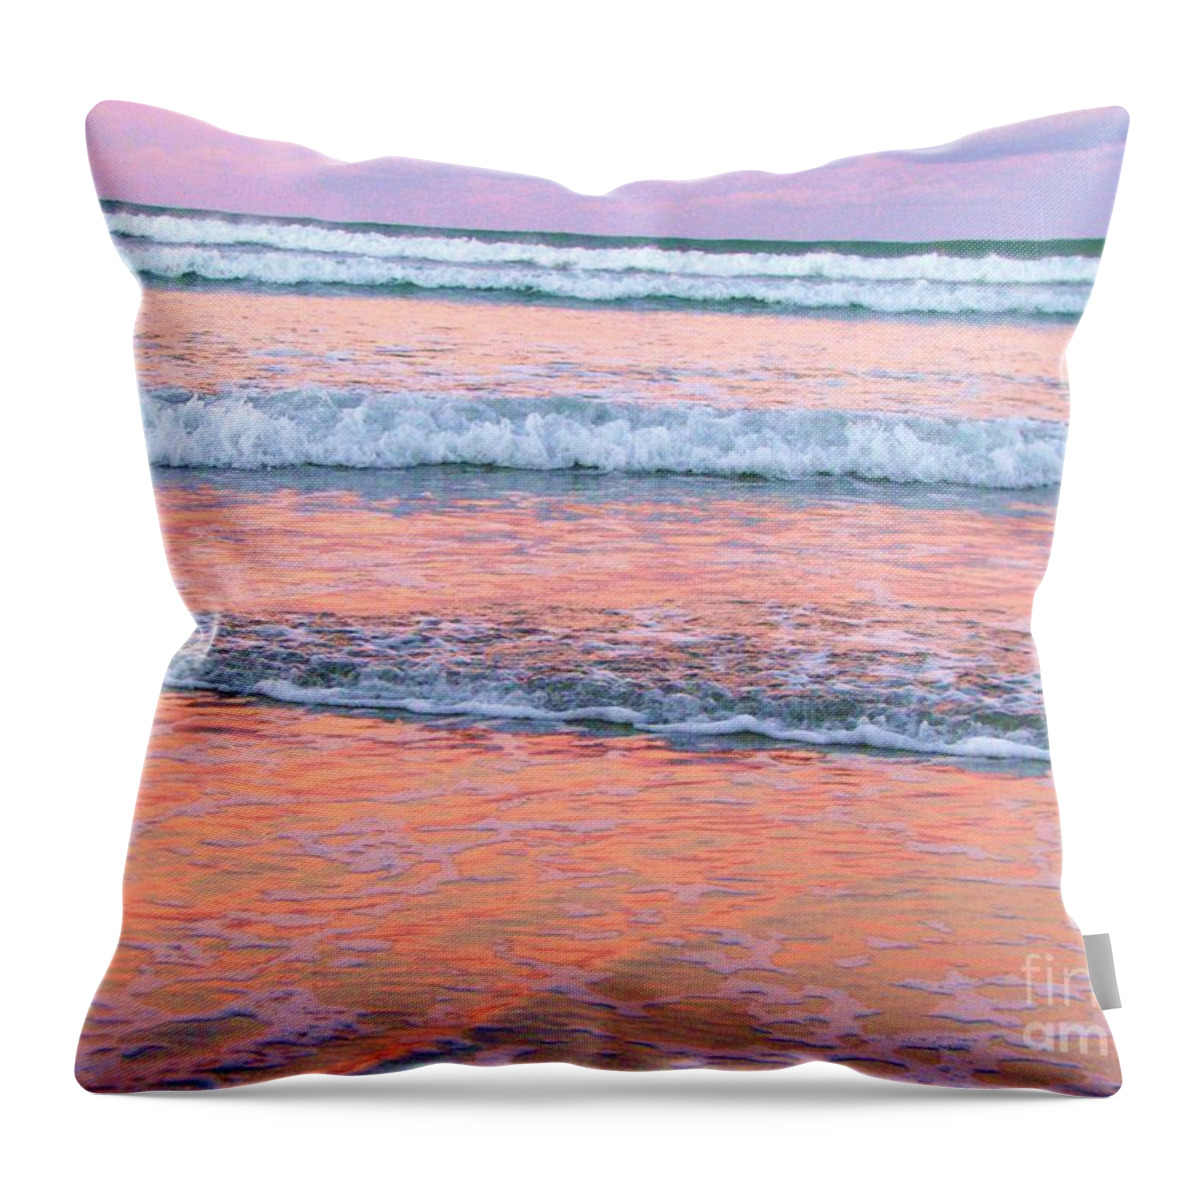 Sunset Throw Pillow featuring the photograph Amazing Pink Sunset by Michele Penner